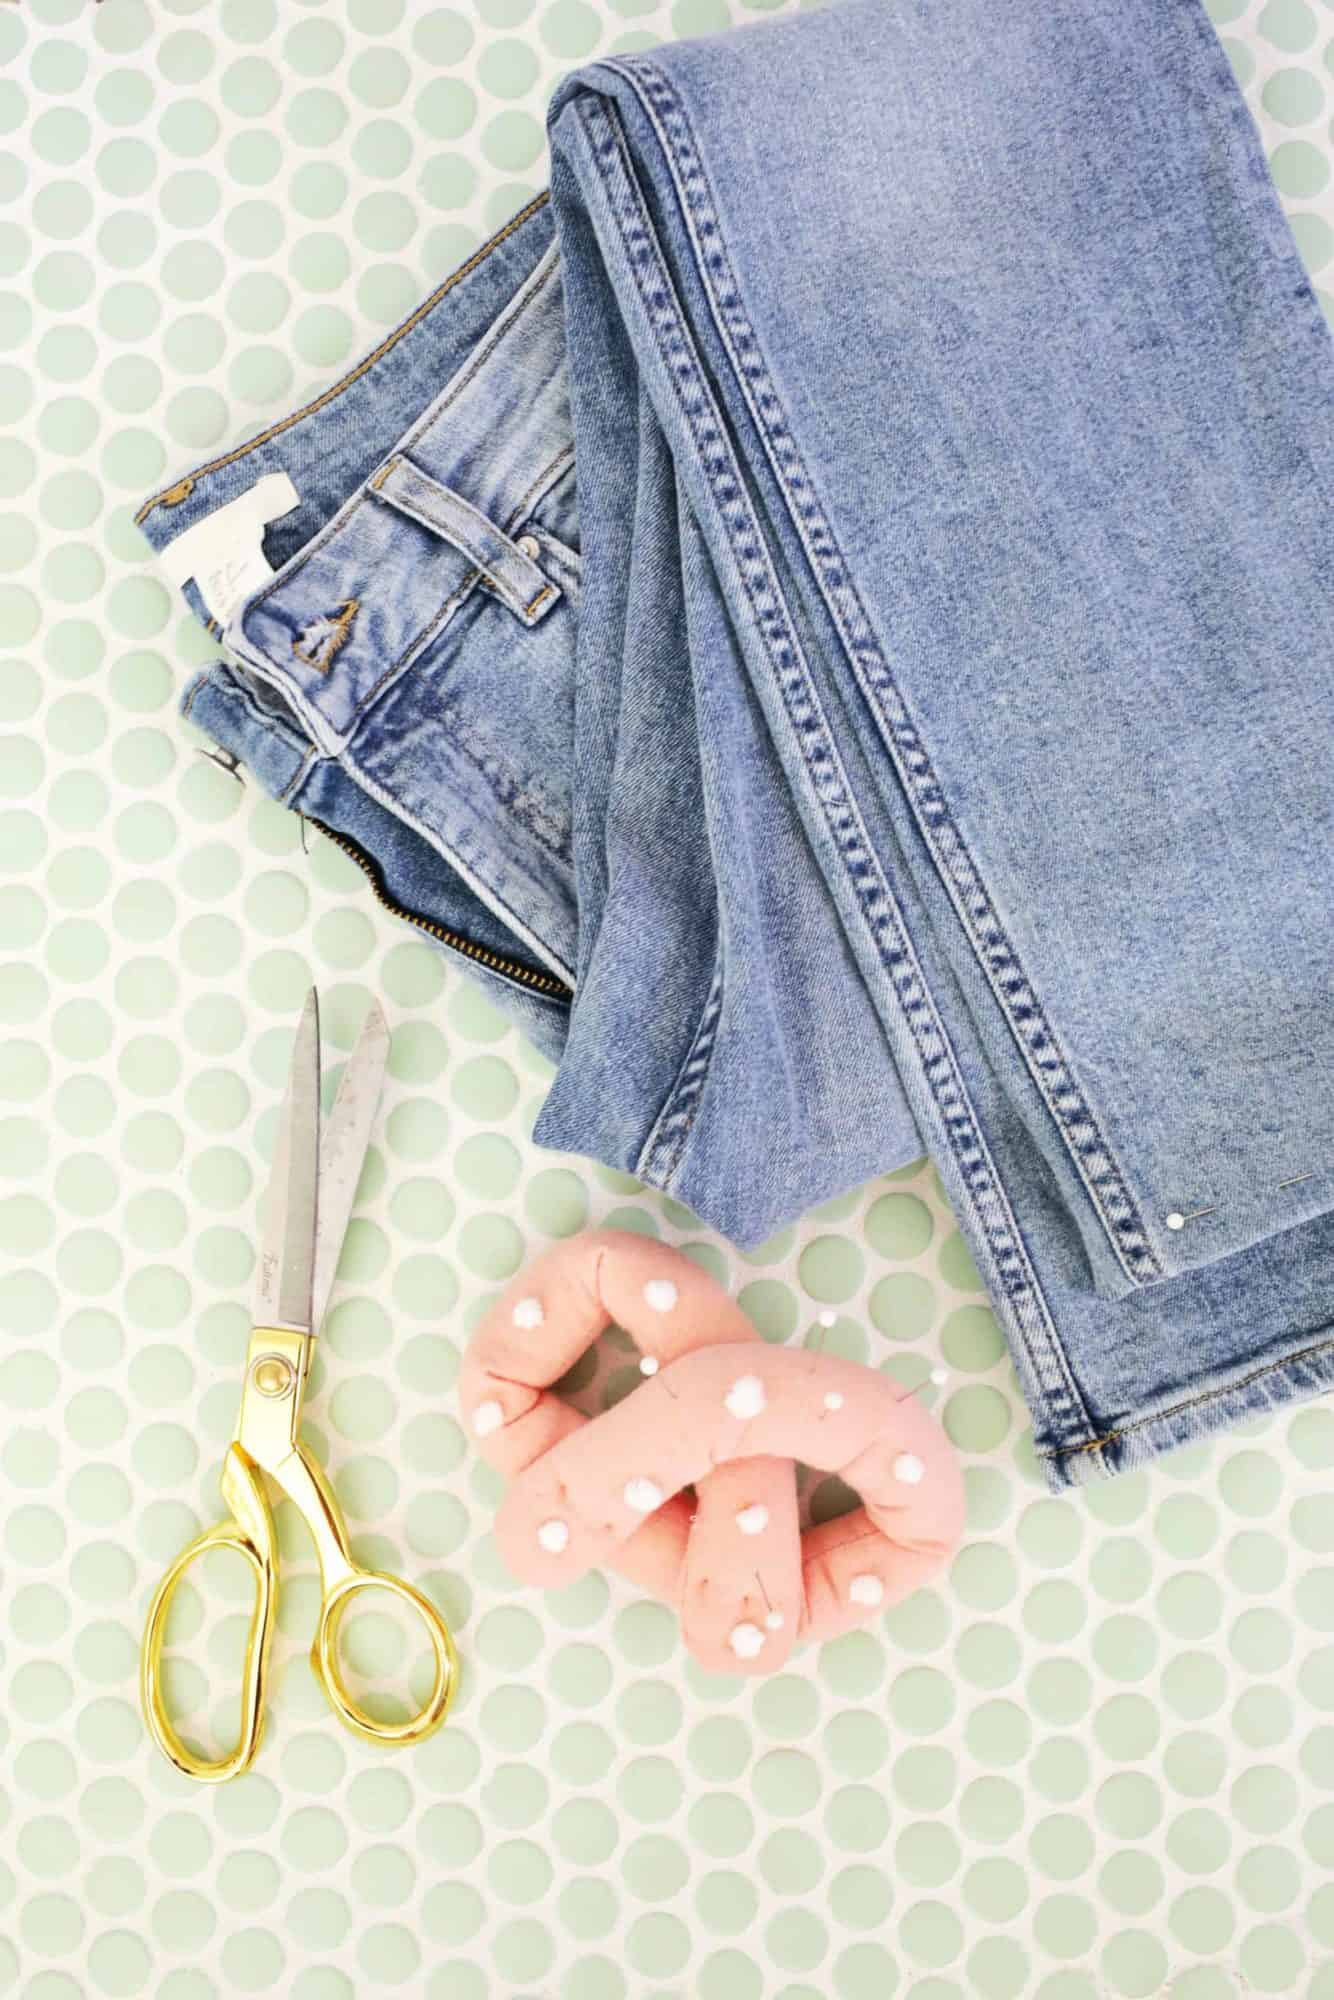 How to Hem Jeans and Keep the Original Hem-EASY tutorial {Fun Friday} - 365  Days of Slow Cooking and Pressure Cooking